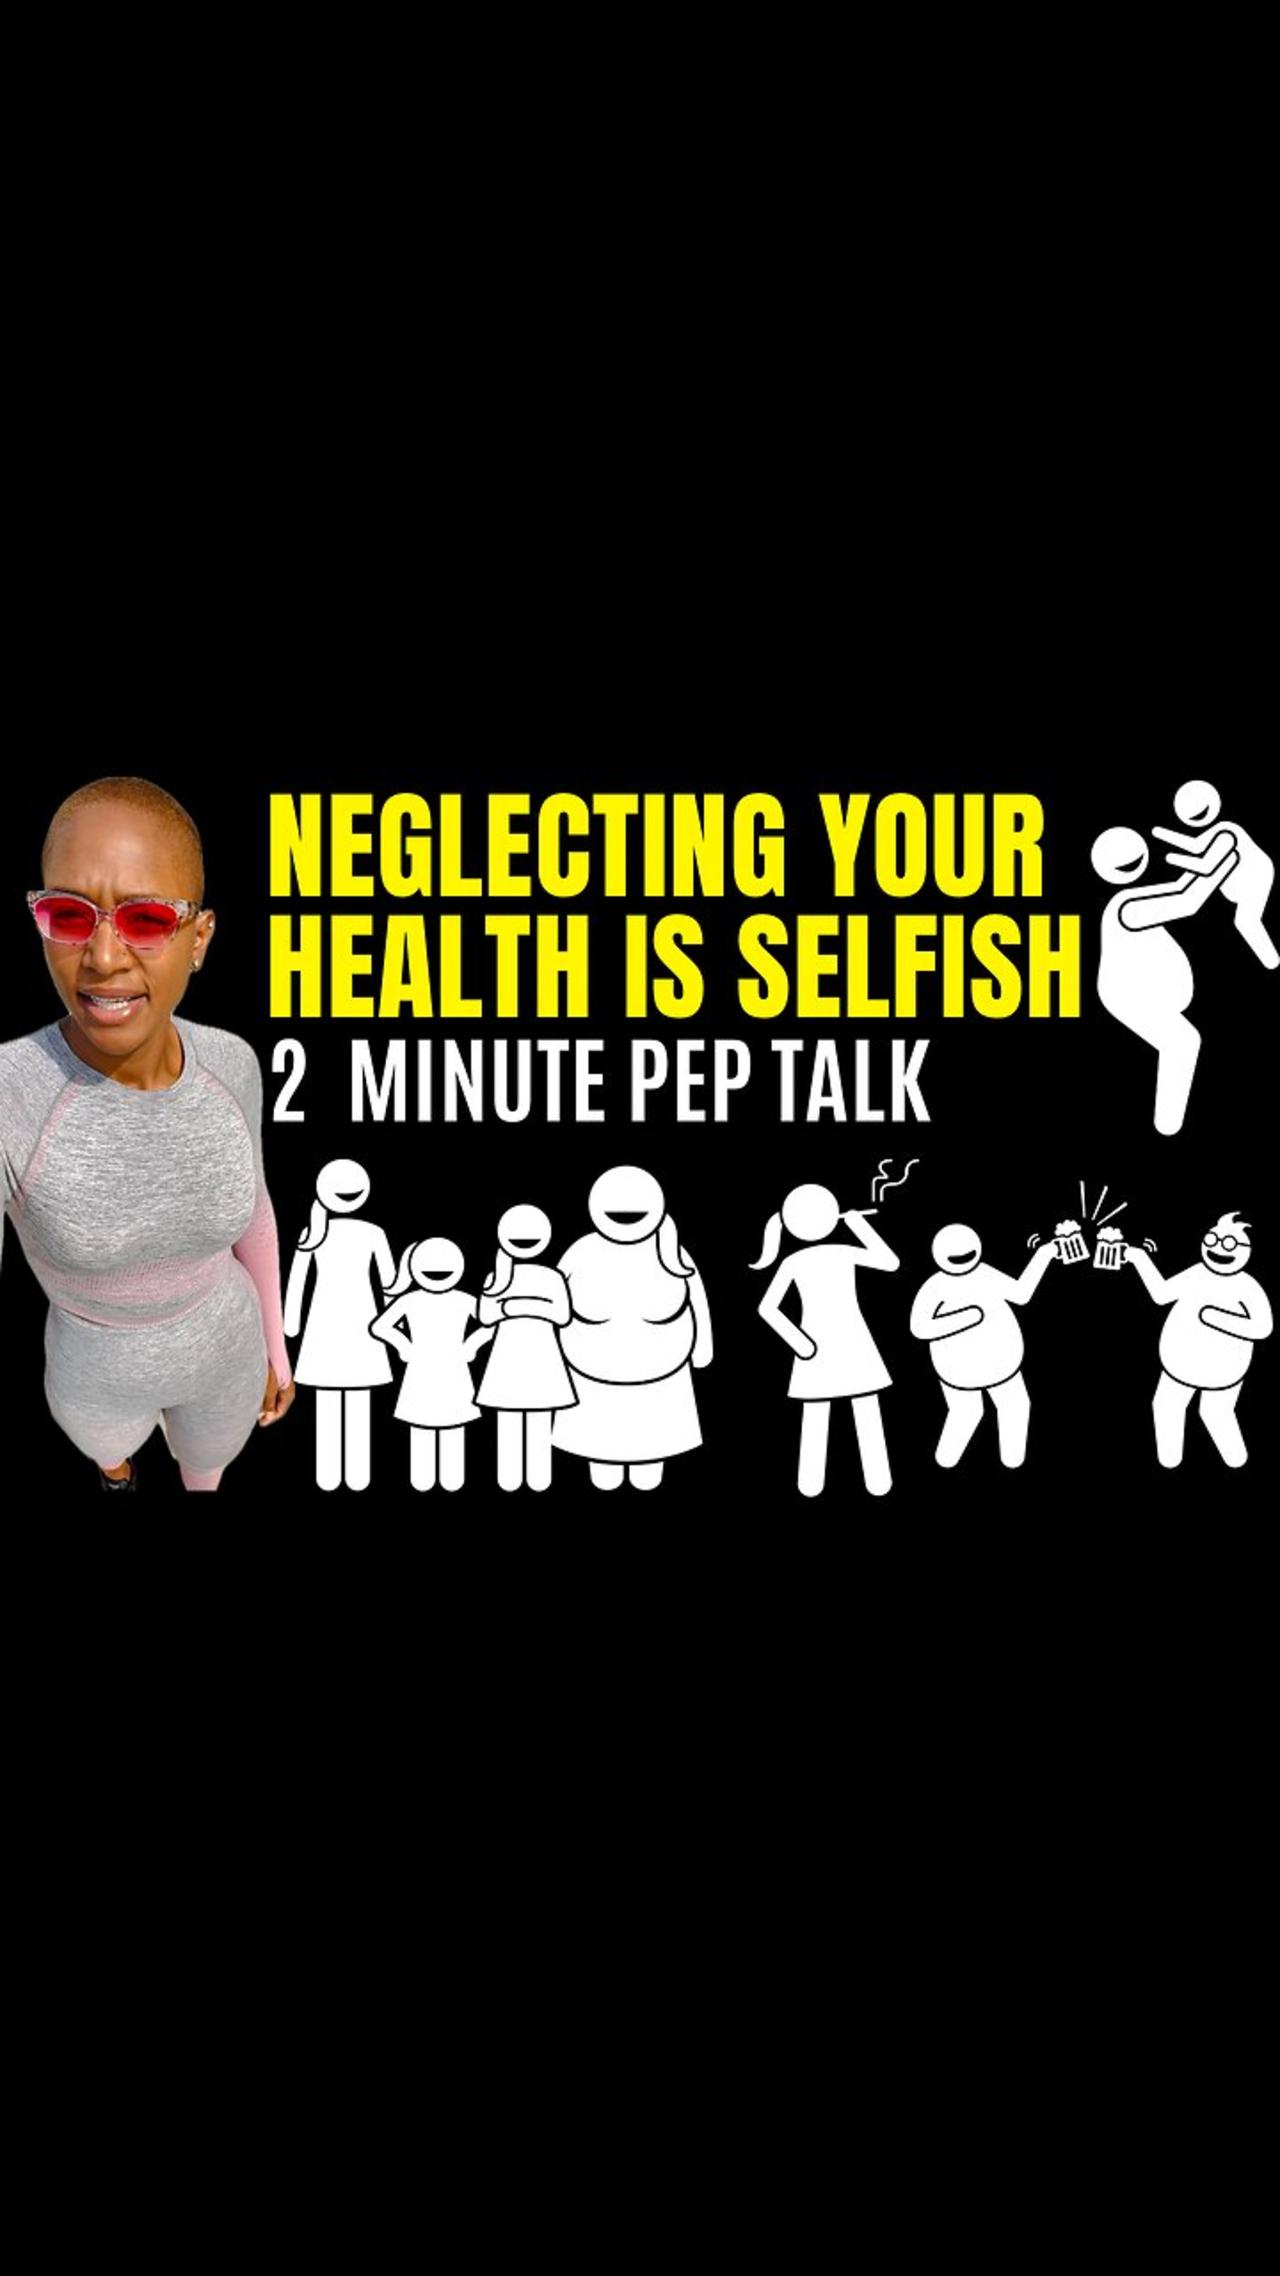 NEGLECTING YOUR HEALTH IS SELFISH! (3 minute motivational pep talk)